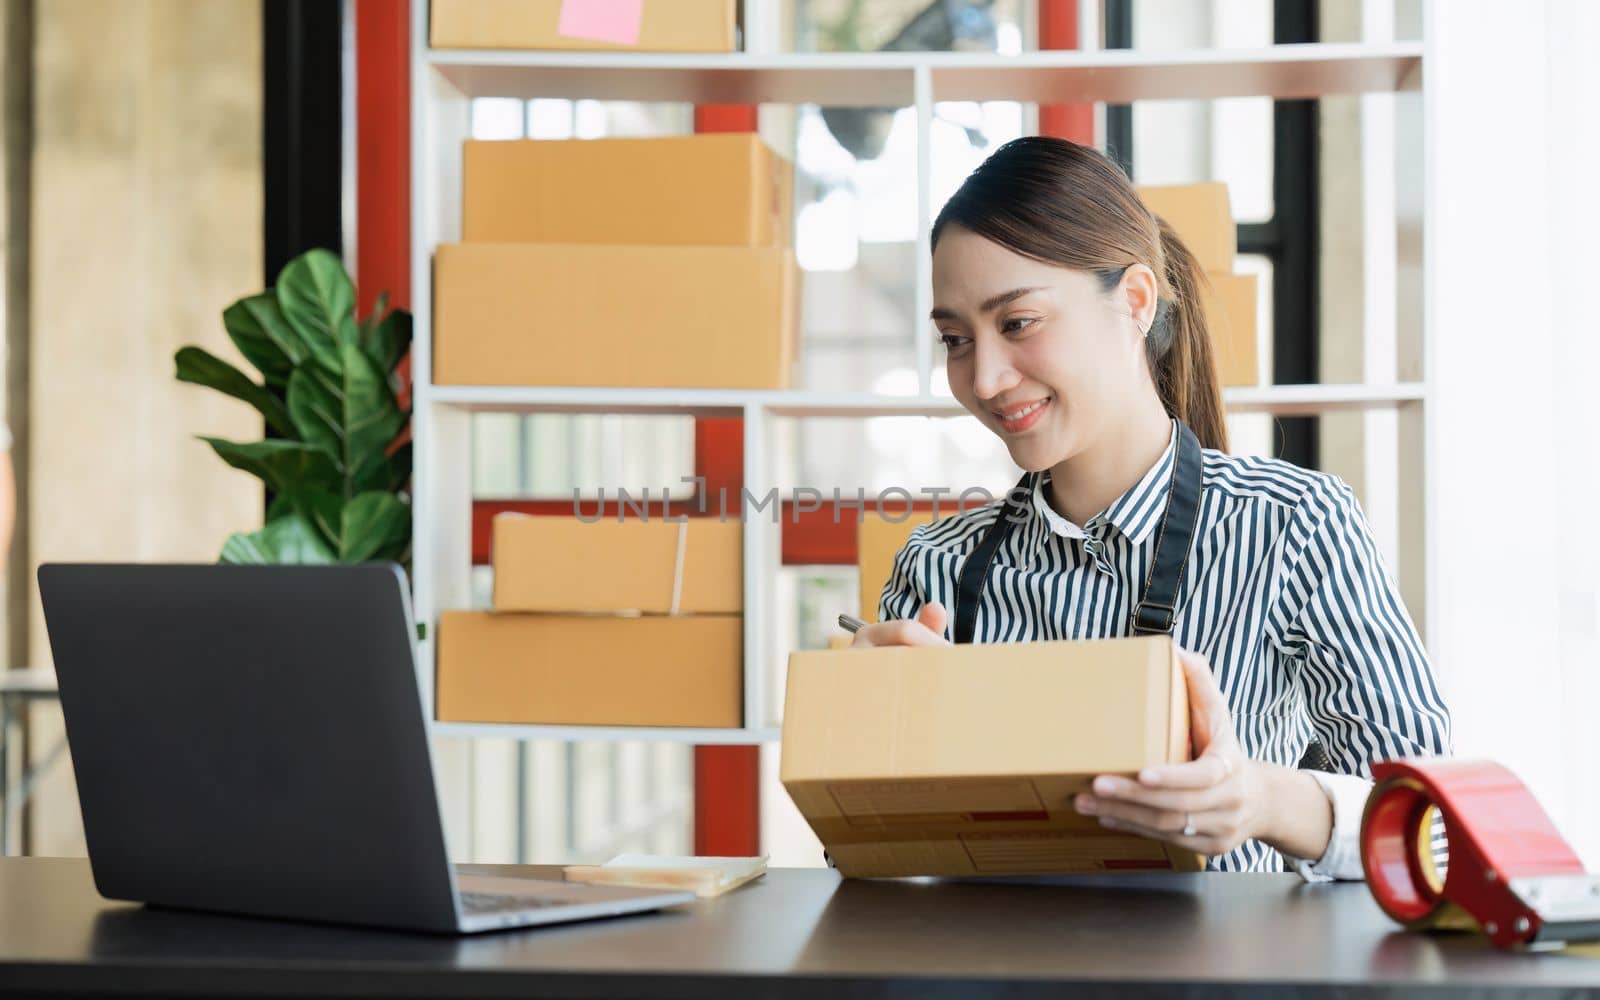 Asian girl working with boxes at home office small business owner start up Entrepreneur, small business, SME or self-employed online and delivery concept by nateemee